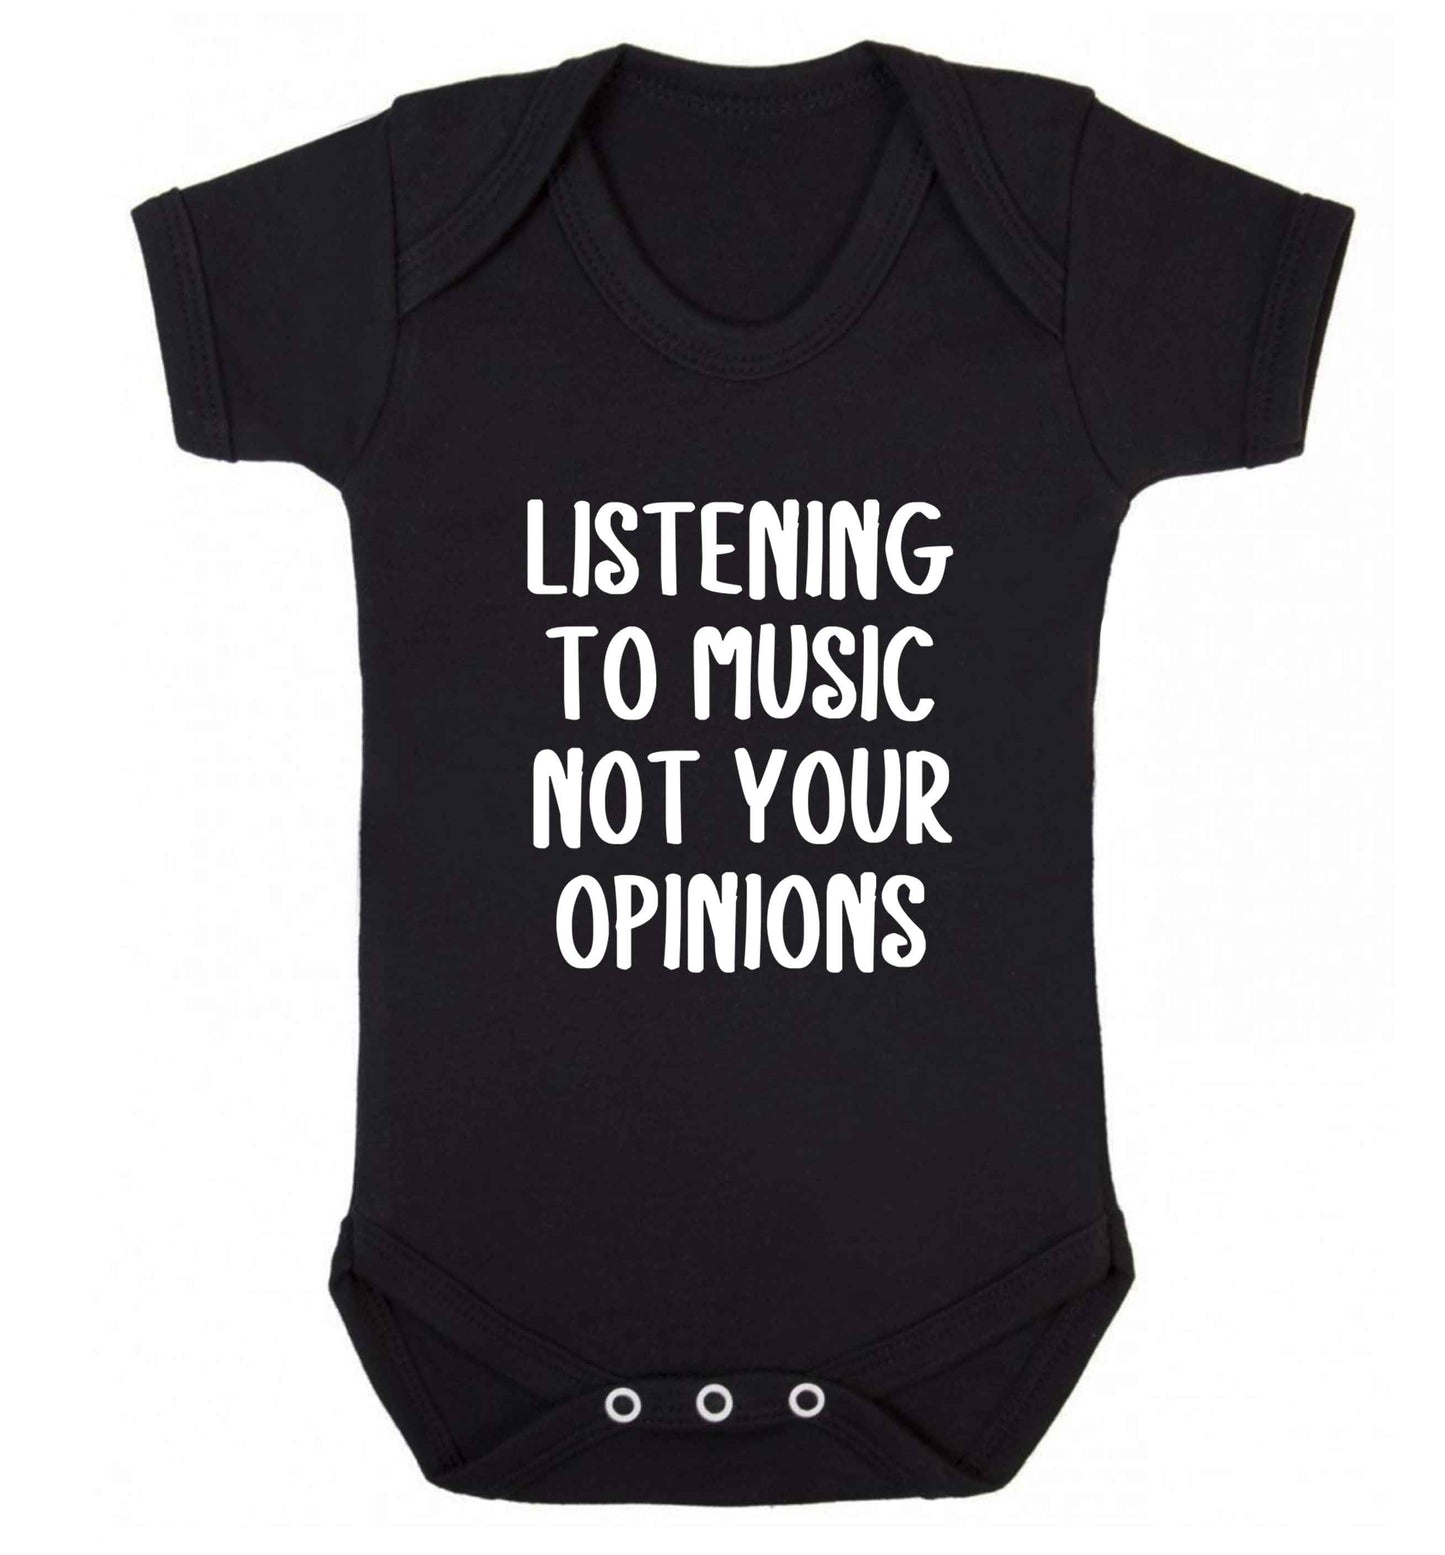 Listening to music not your opinions baby vest black 18-24 months